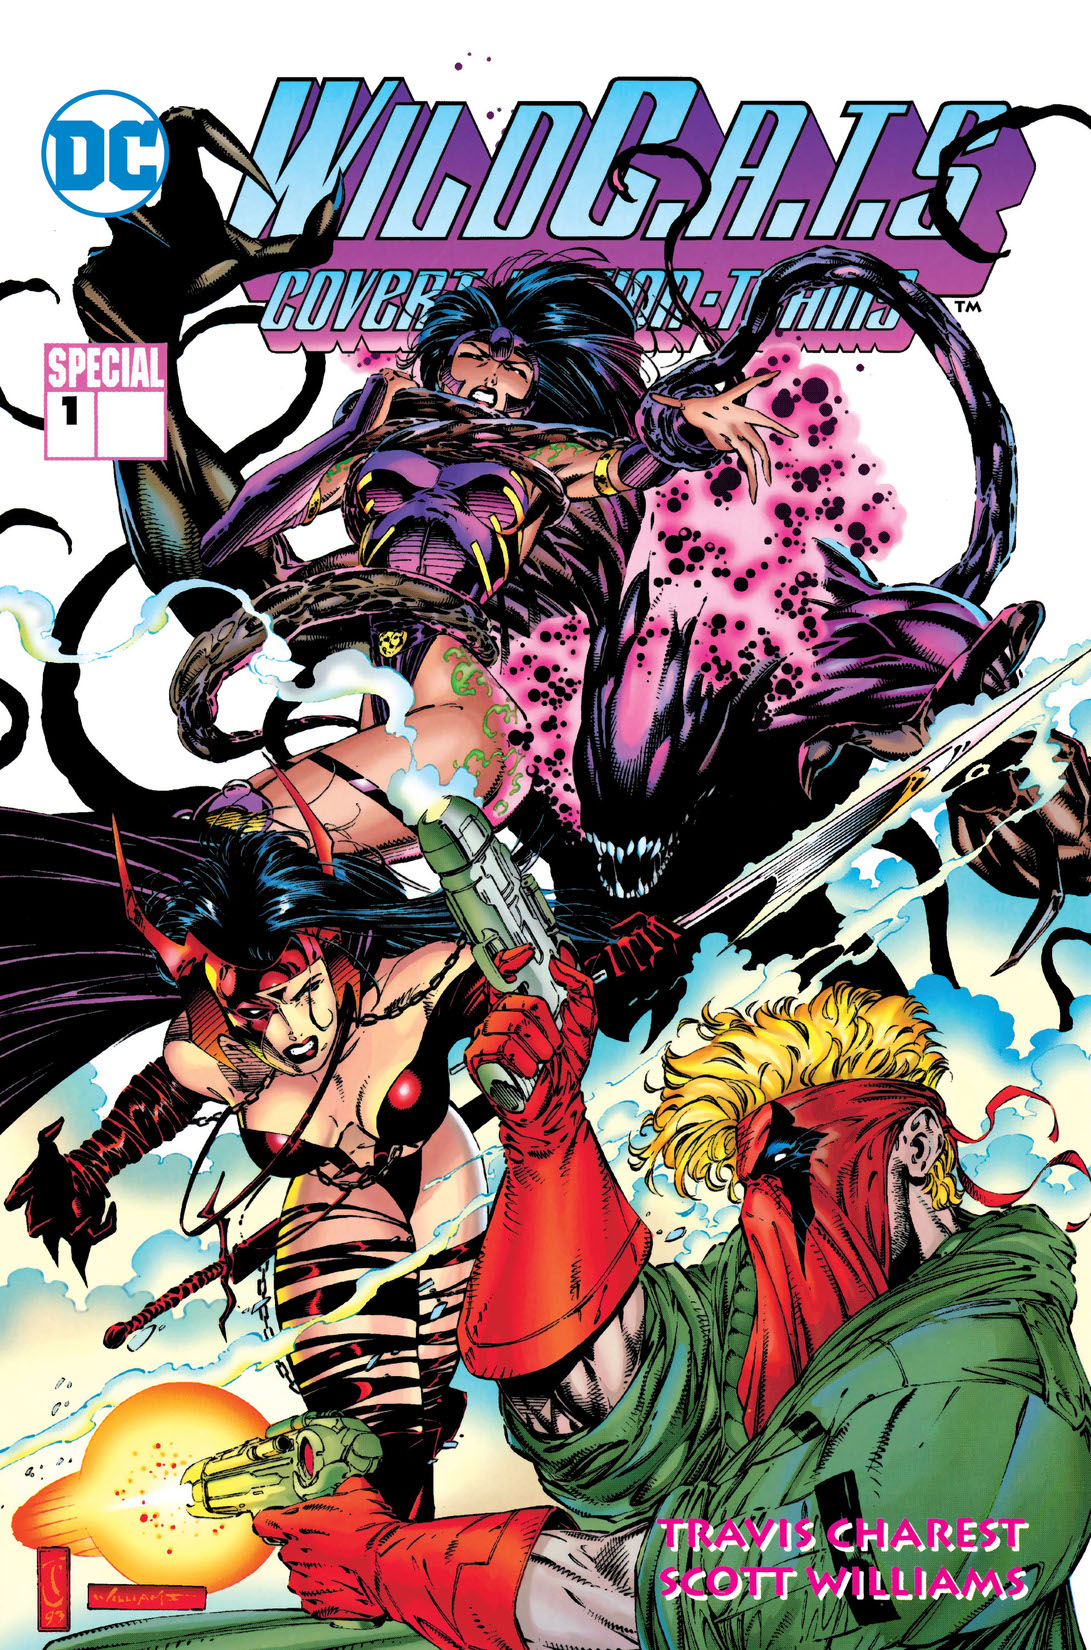 WildC.A.T.S Special #1 preview images